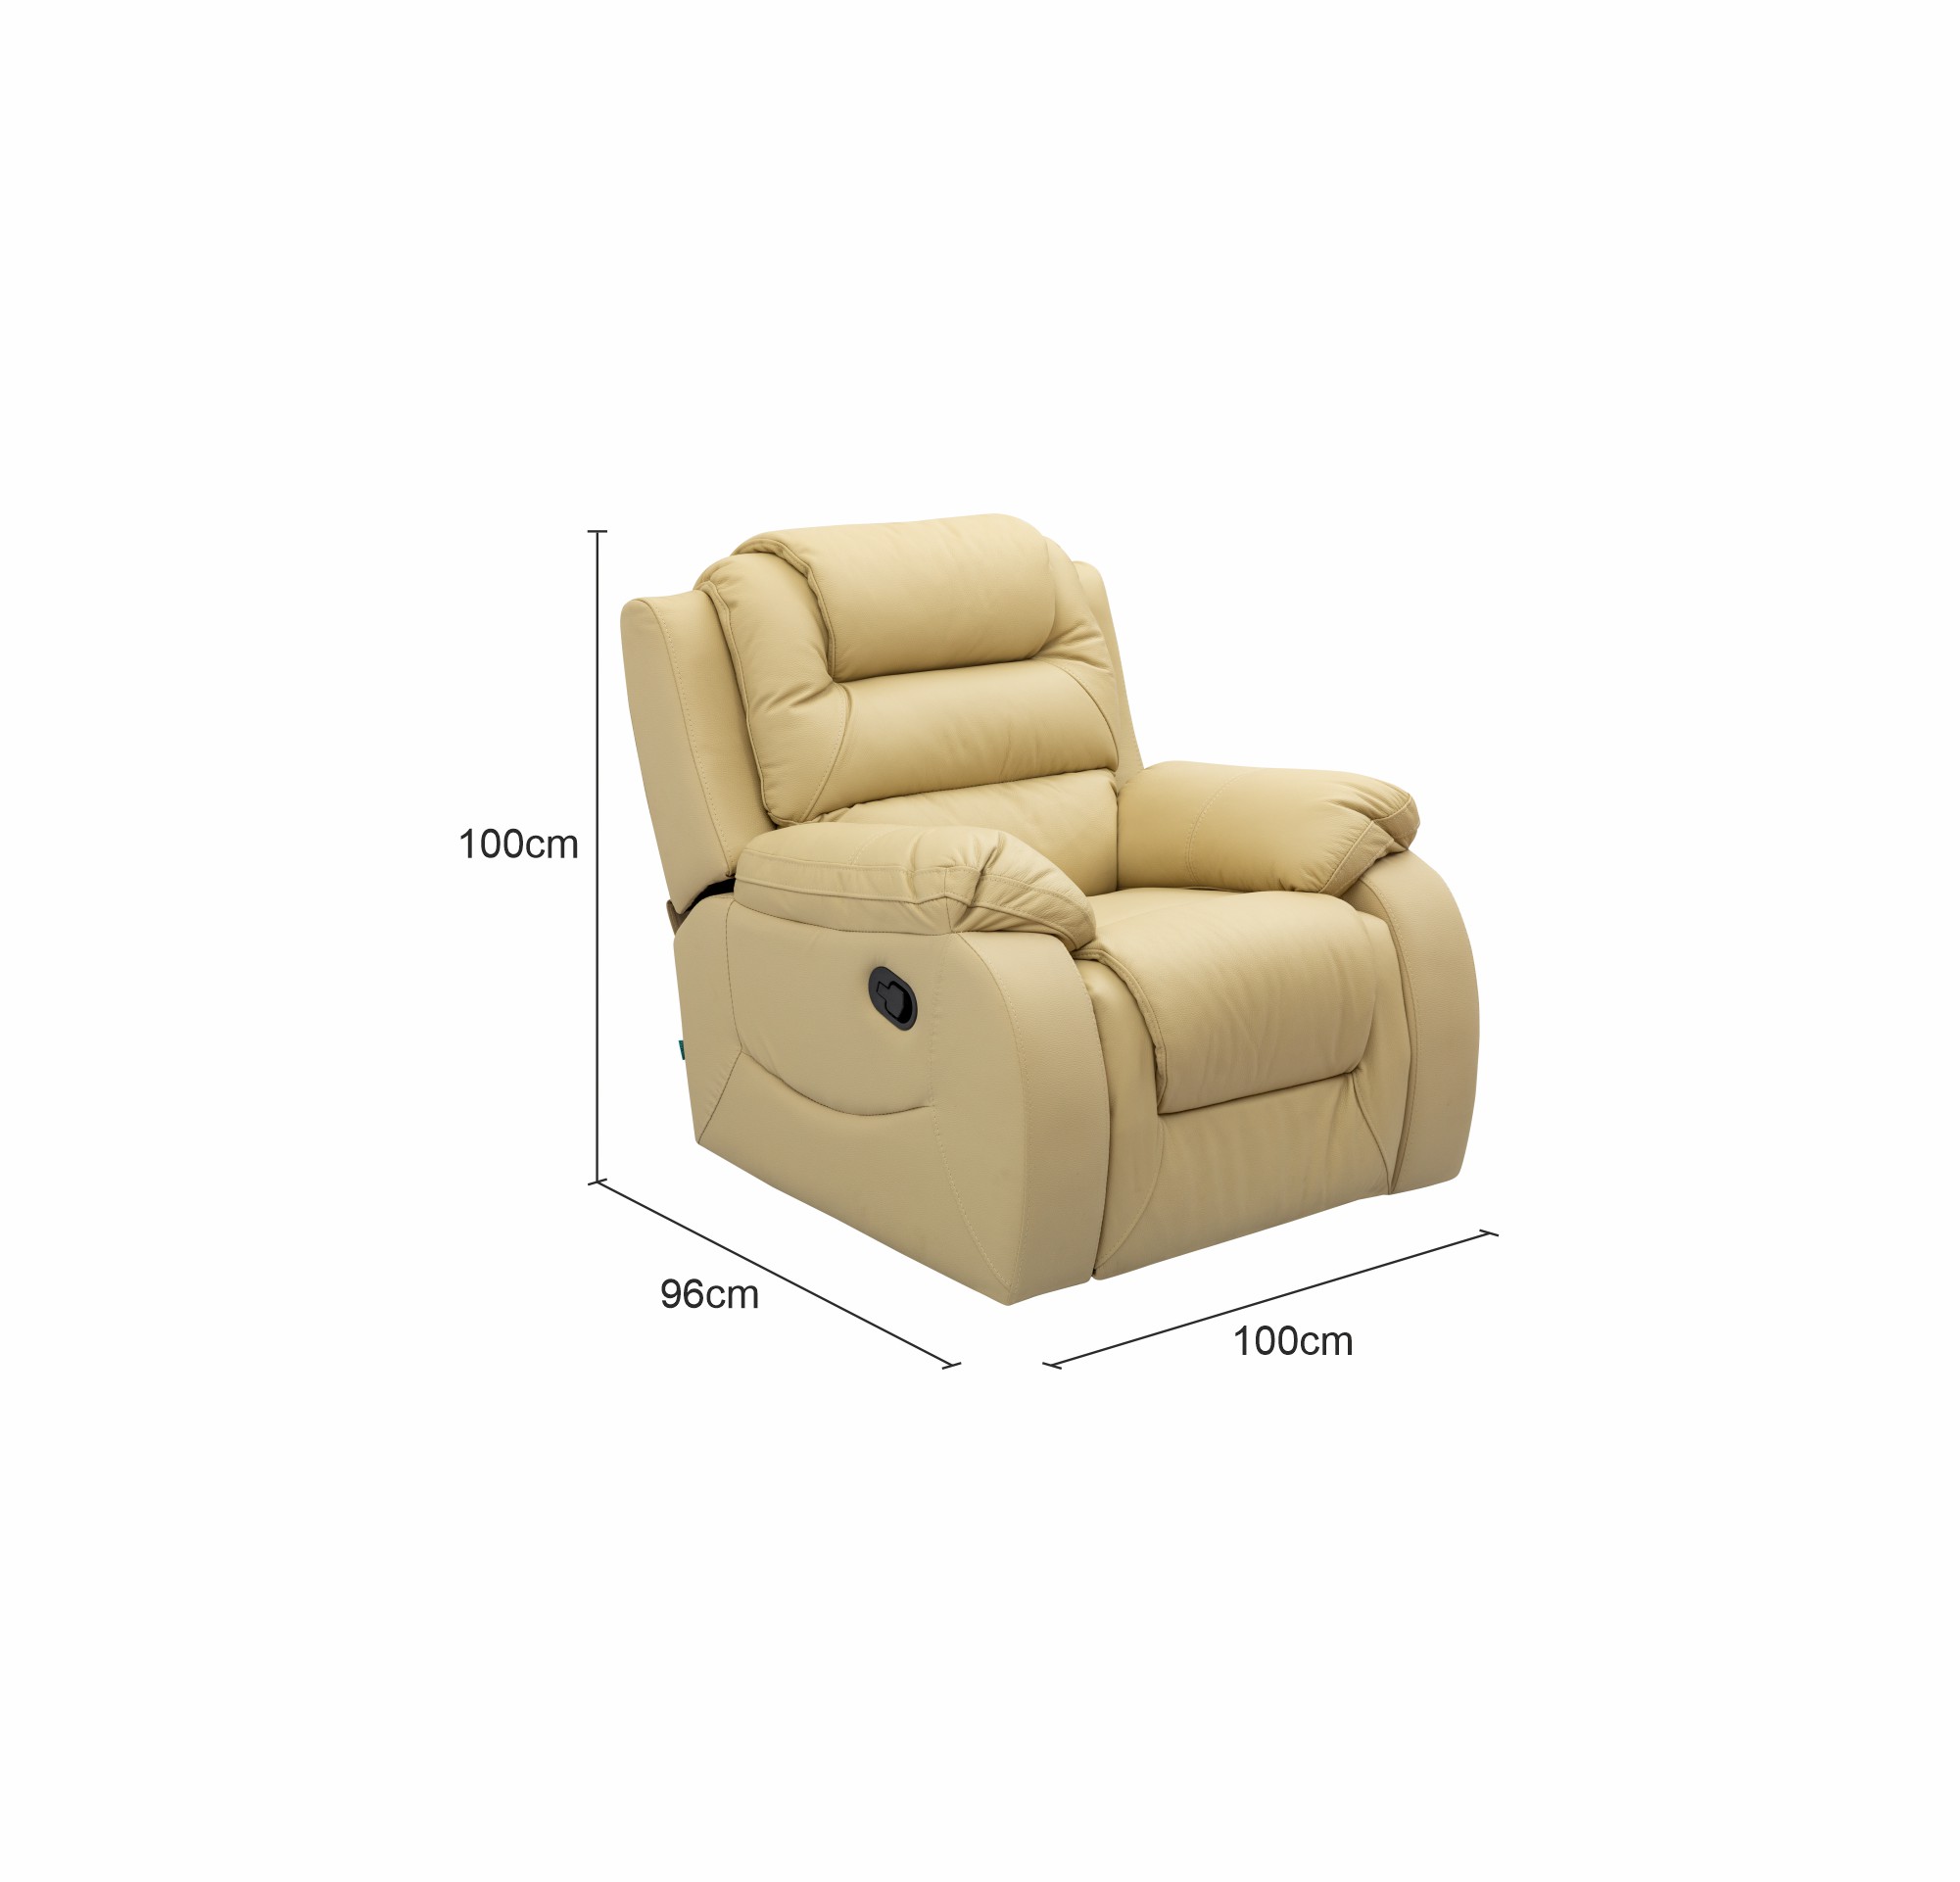 SSC003+1R+1R-Sinclair Sofa Set With Recliner-HLIL15